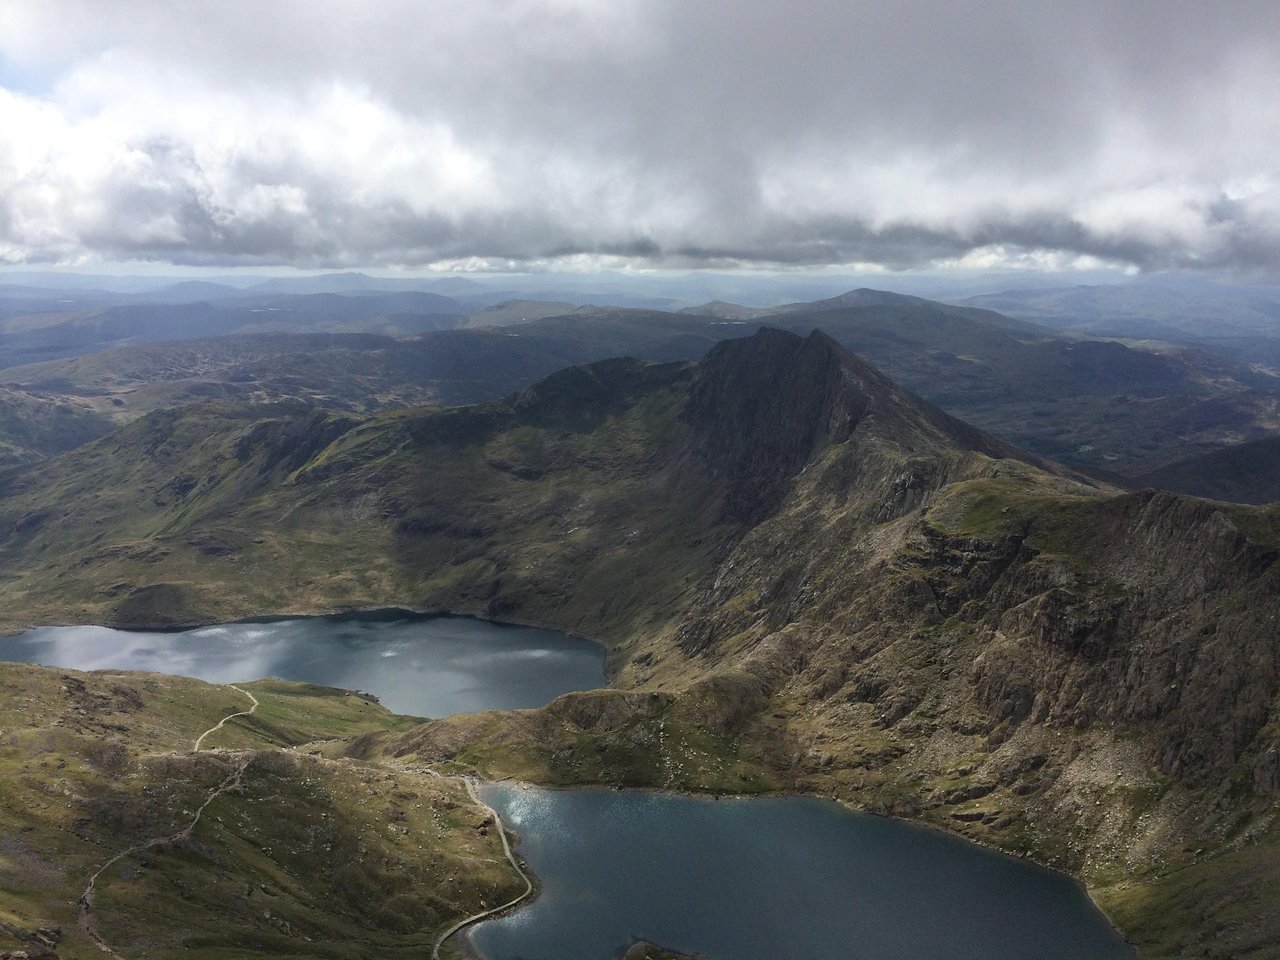 RT @hikingreviewsuk: Guided #hiking in #snowdonia http://tinyurl.com/p95kf8n @WelshBizEvents @EventsNWales @GoNorthWales @nwalestweetsuk http://t.co/vMPAxW2OHM